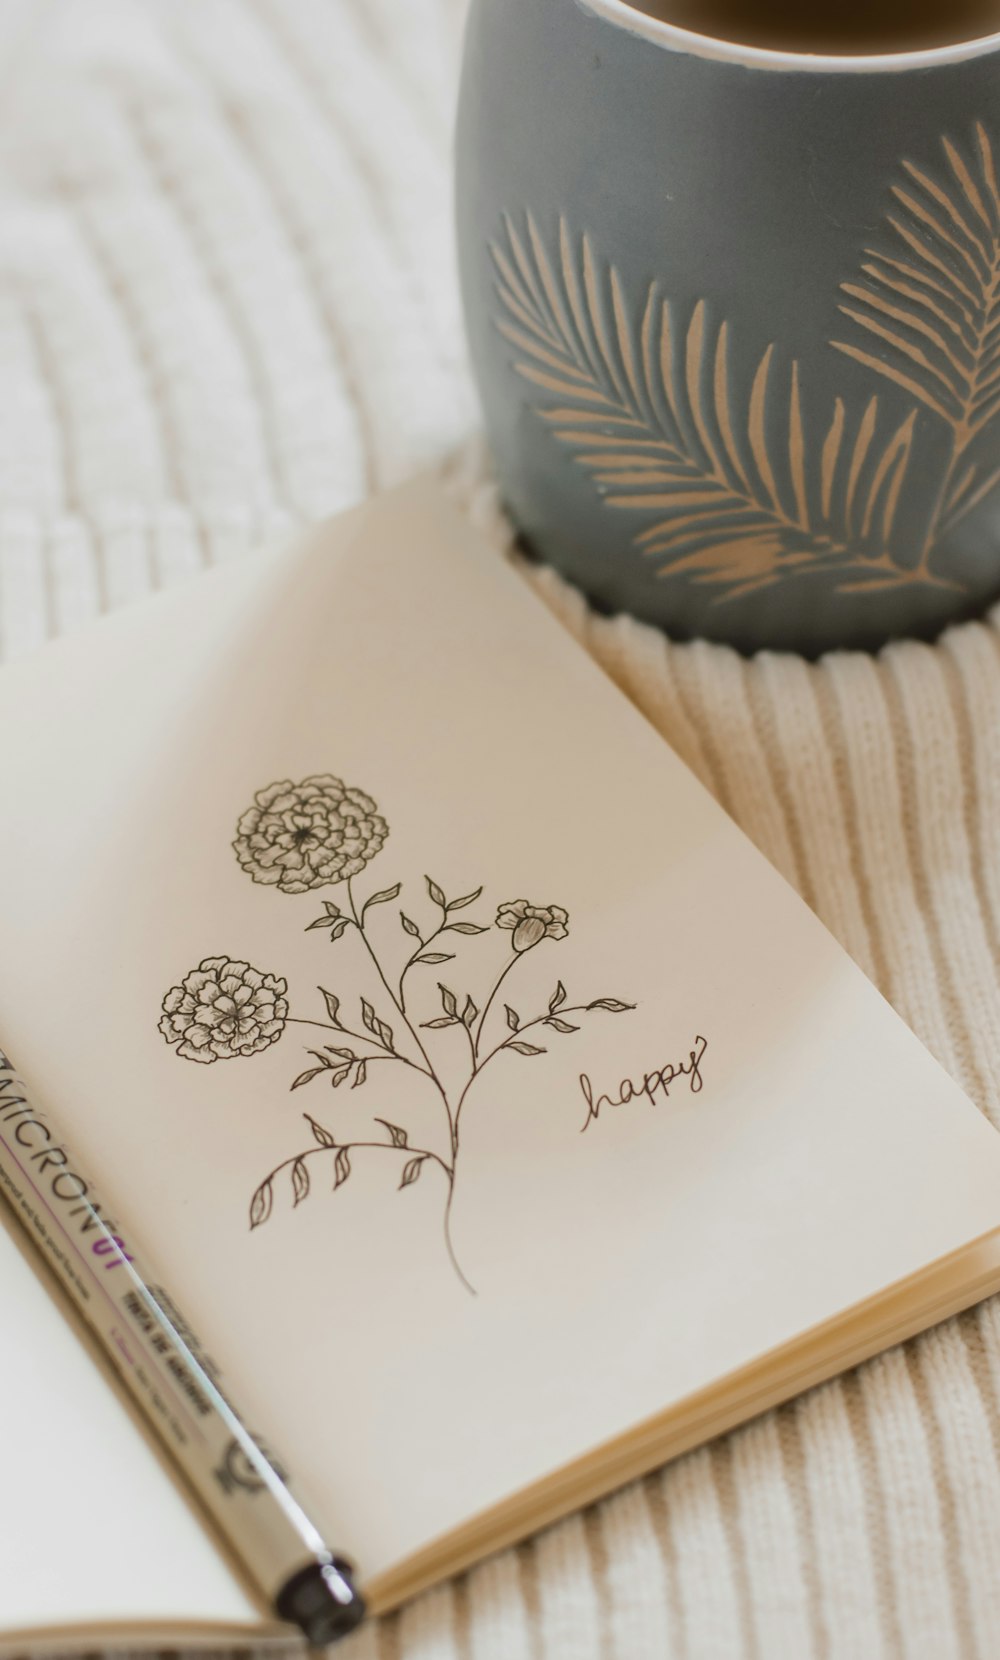 a notebook with a drawing of a flower next to a cup of coffee